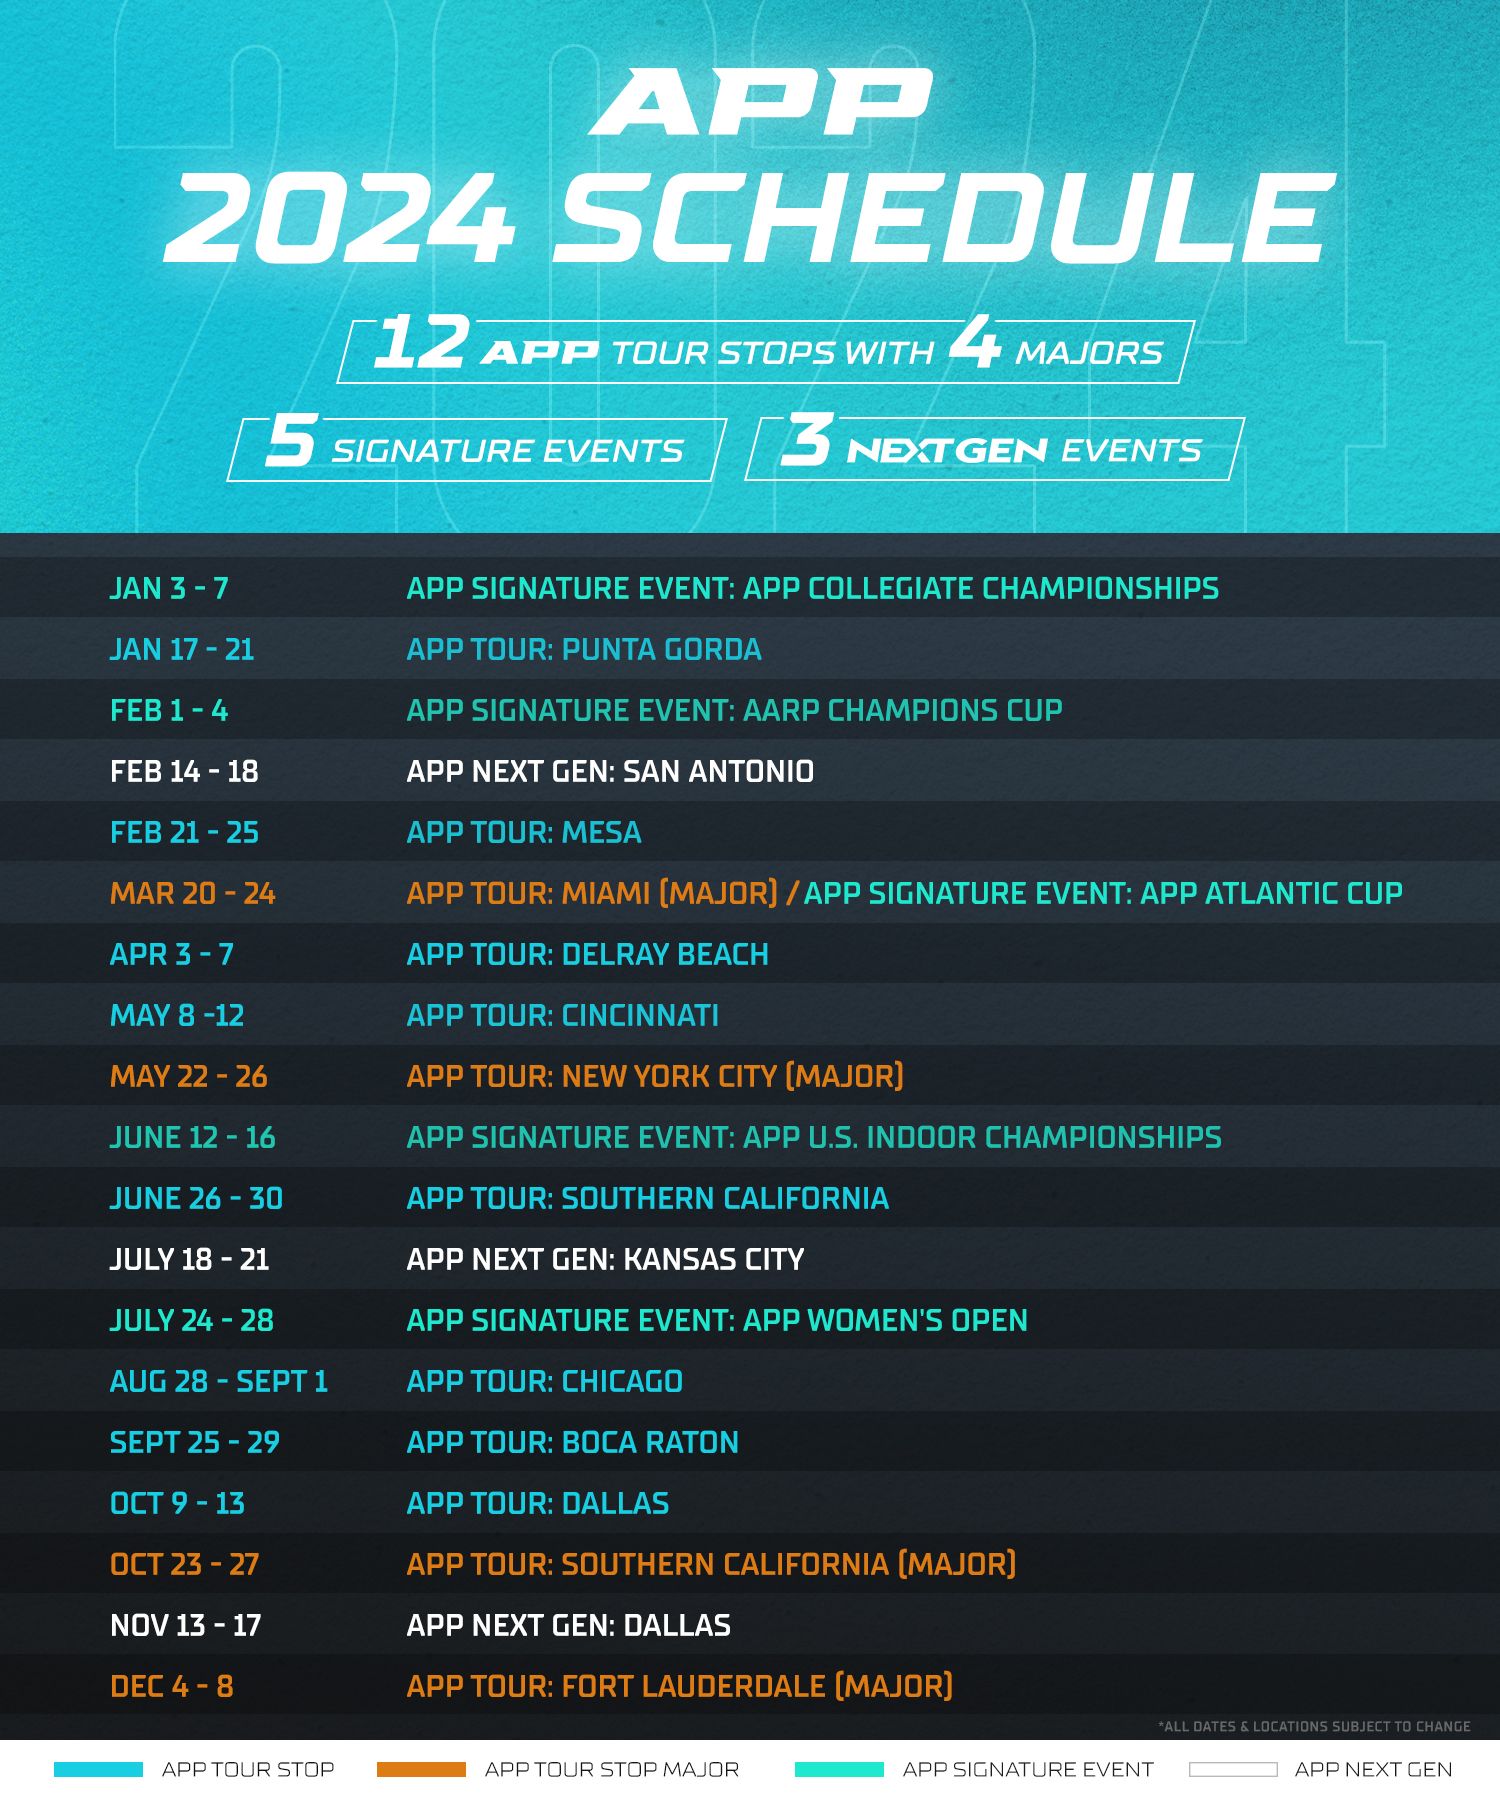 The schedule for APP Tour's stops in 2024.